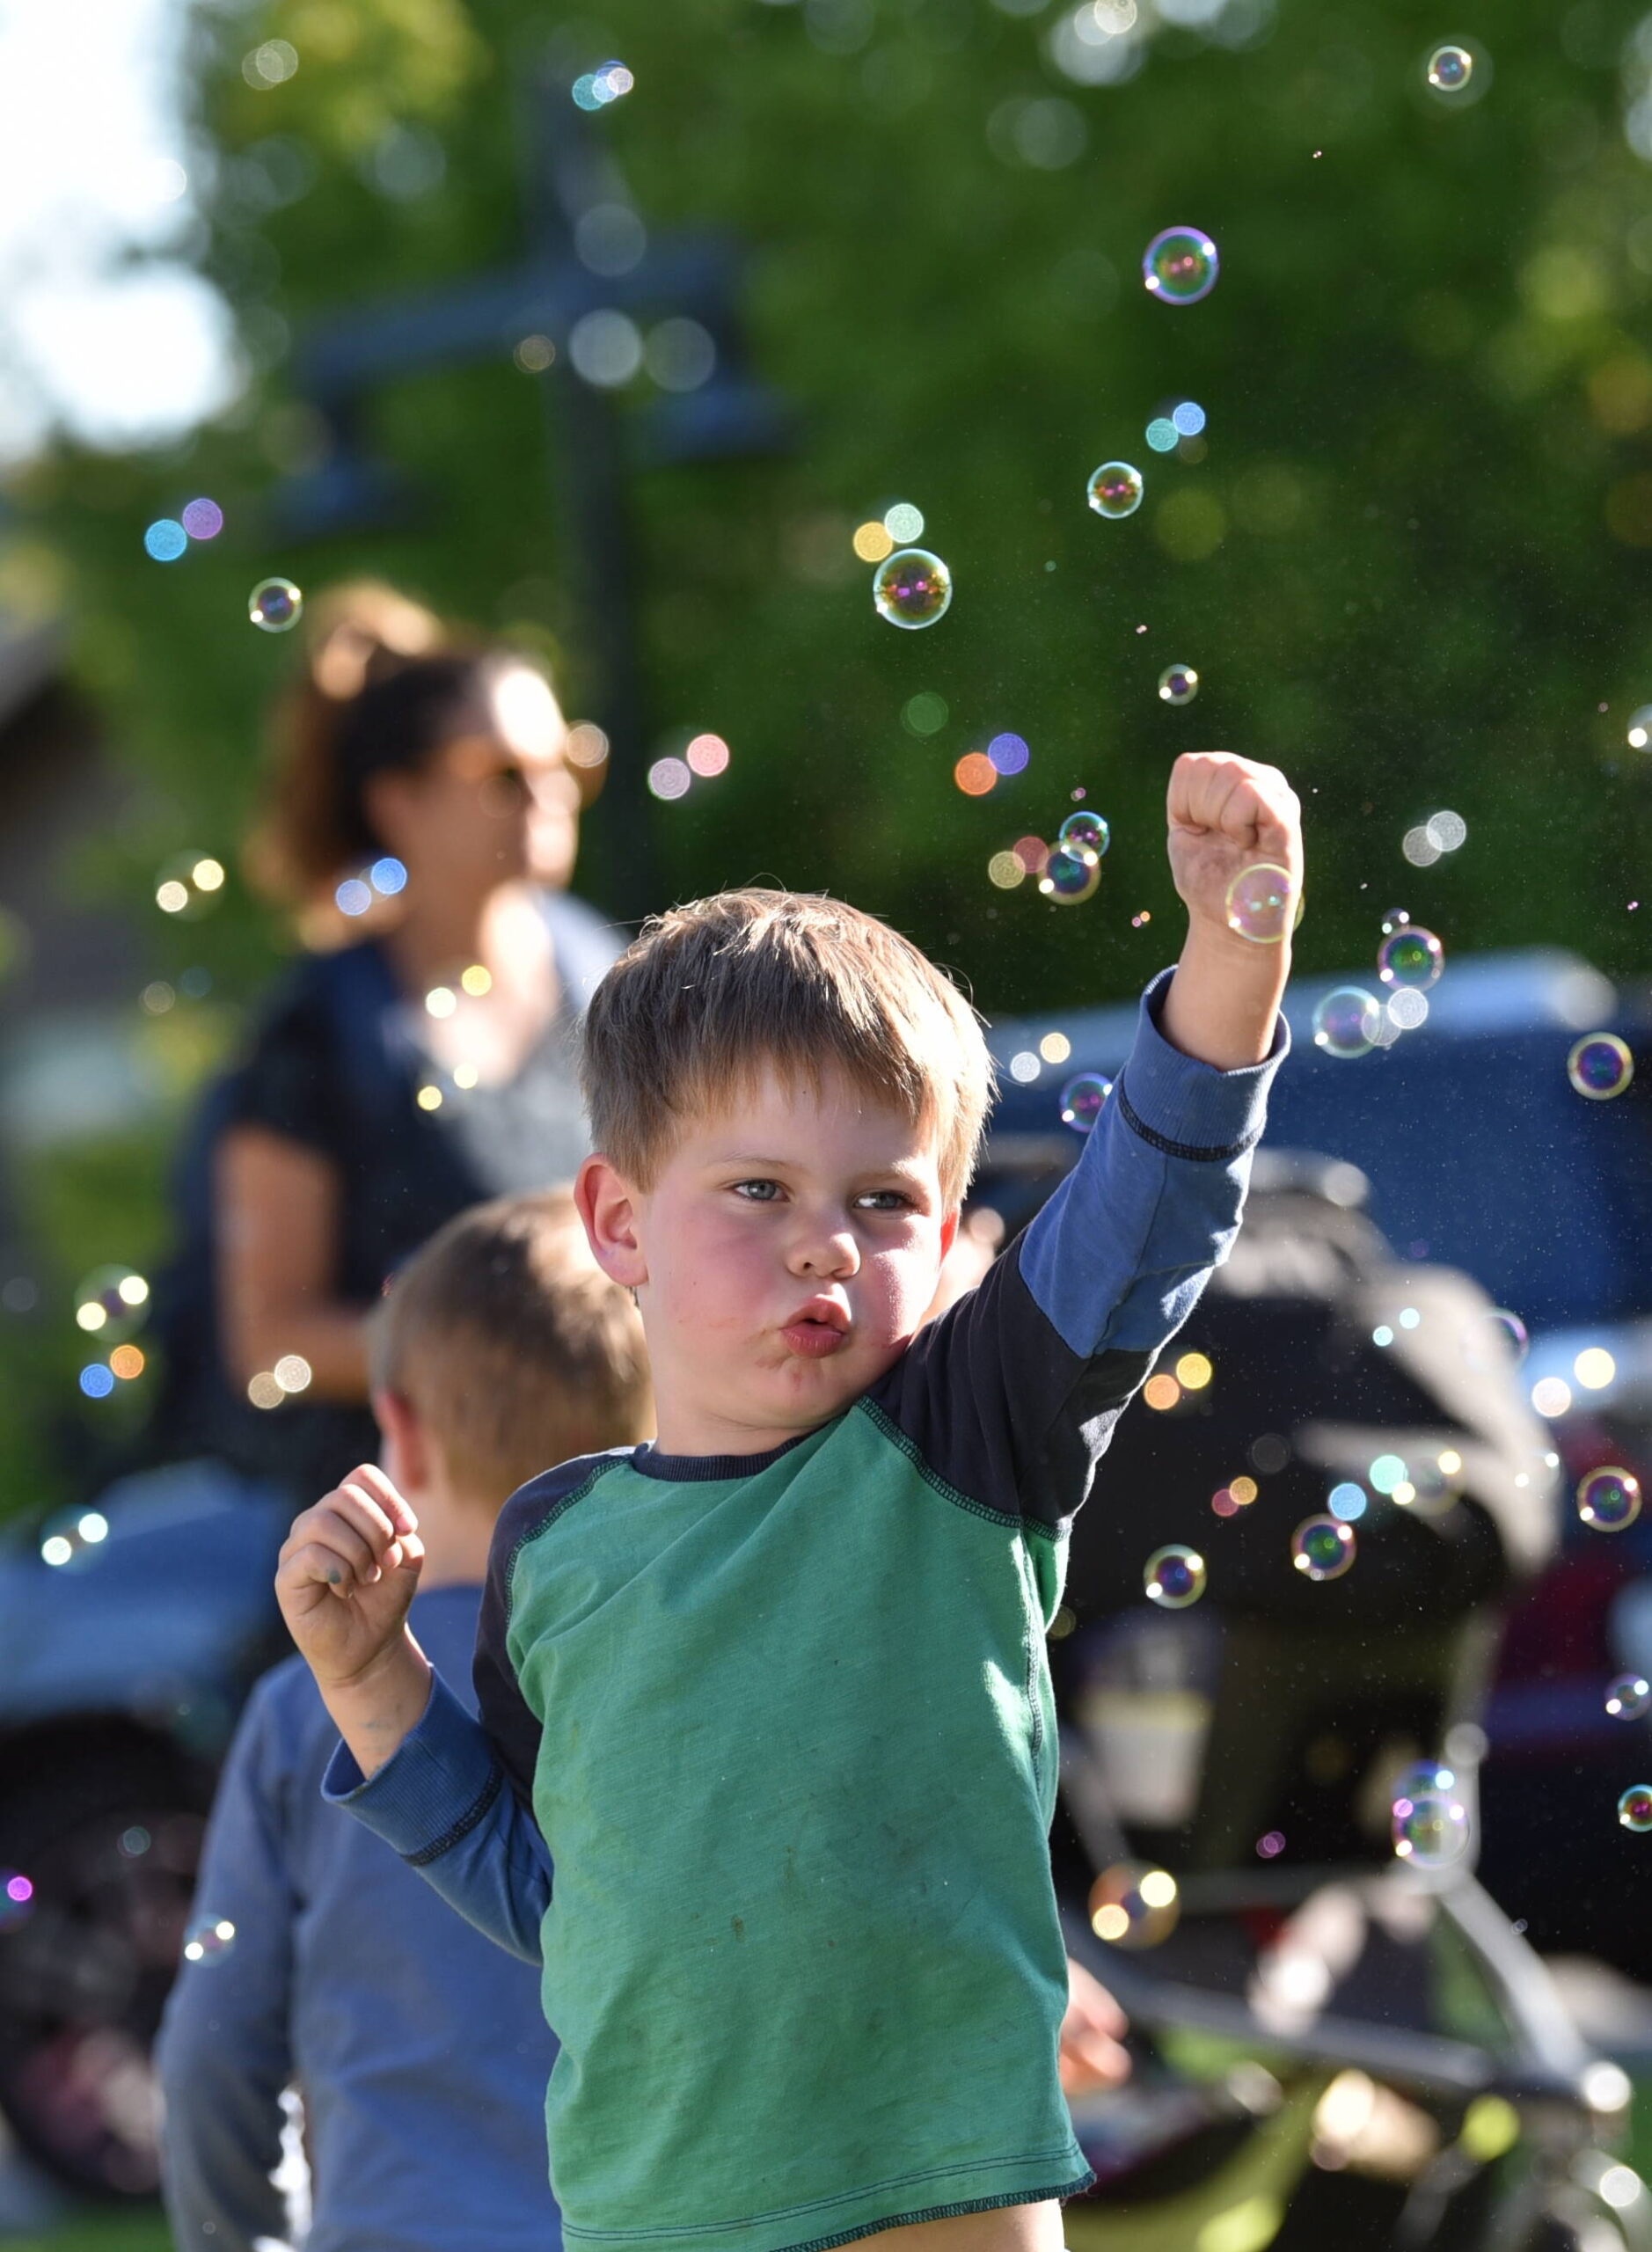 Henry Allison, 4, enjoys punching bubbles at the KiDiMu activity area during the National Night Out community event held at Town Center Aug. 1.